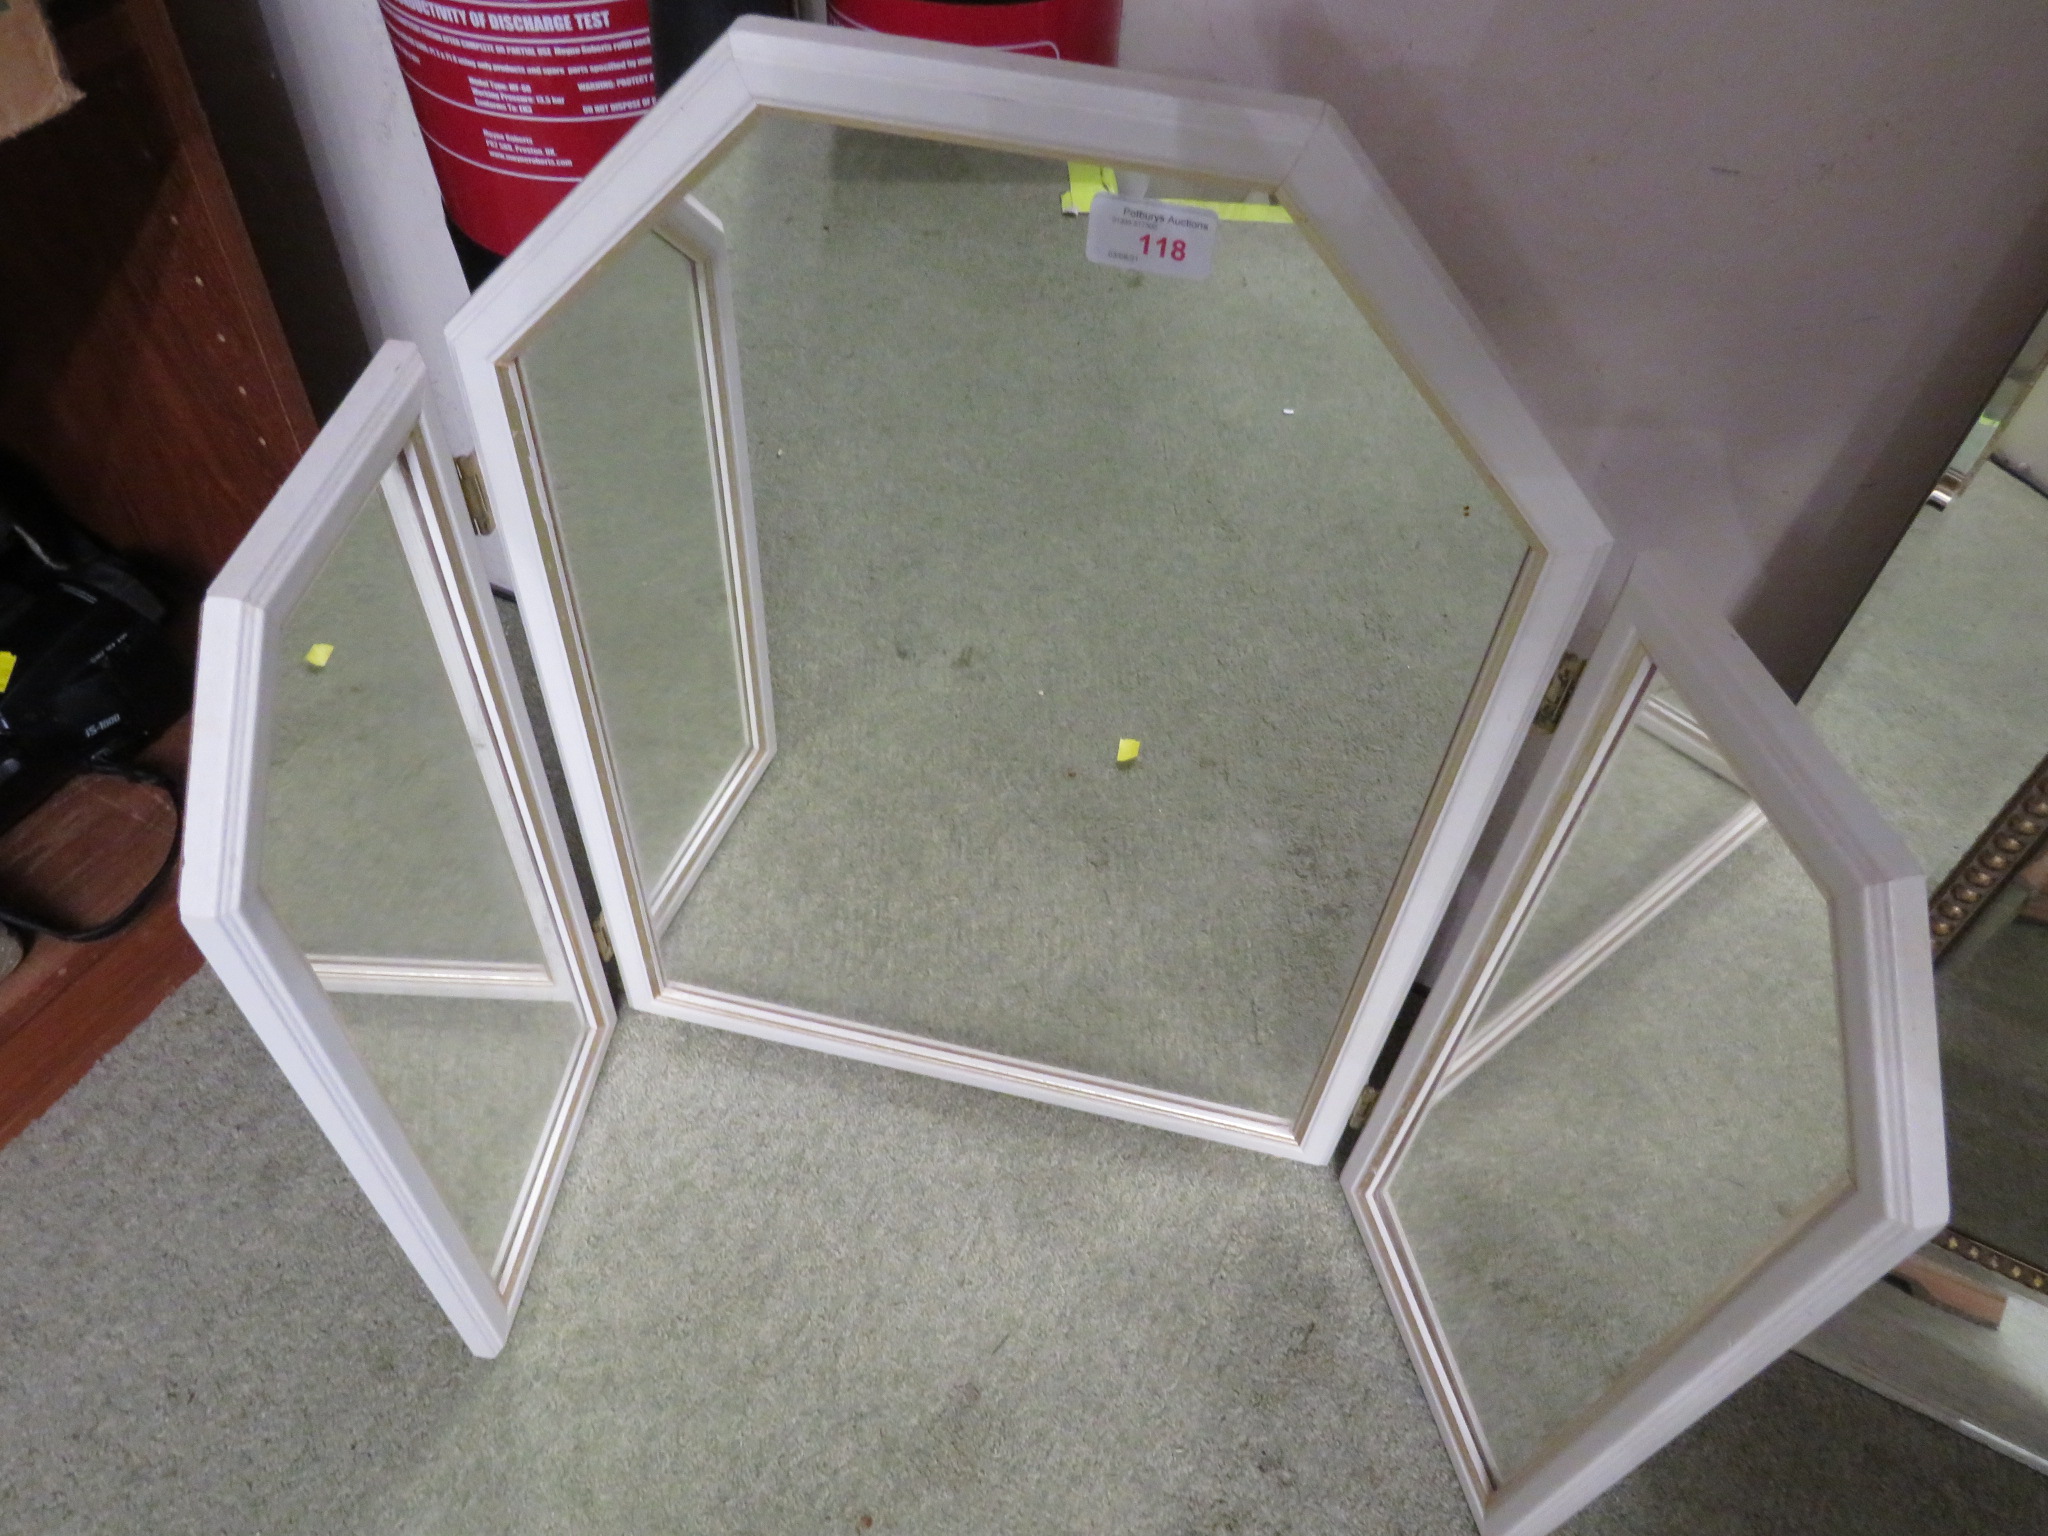 THREE PANEL DRESSING TABLE MIRROR IN A WHITE PAINTED FRAME.